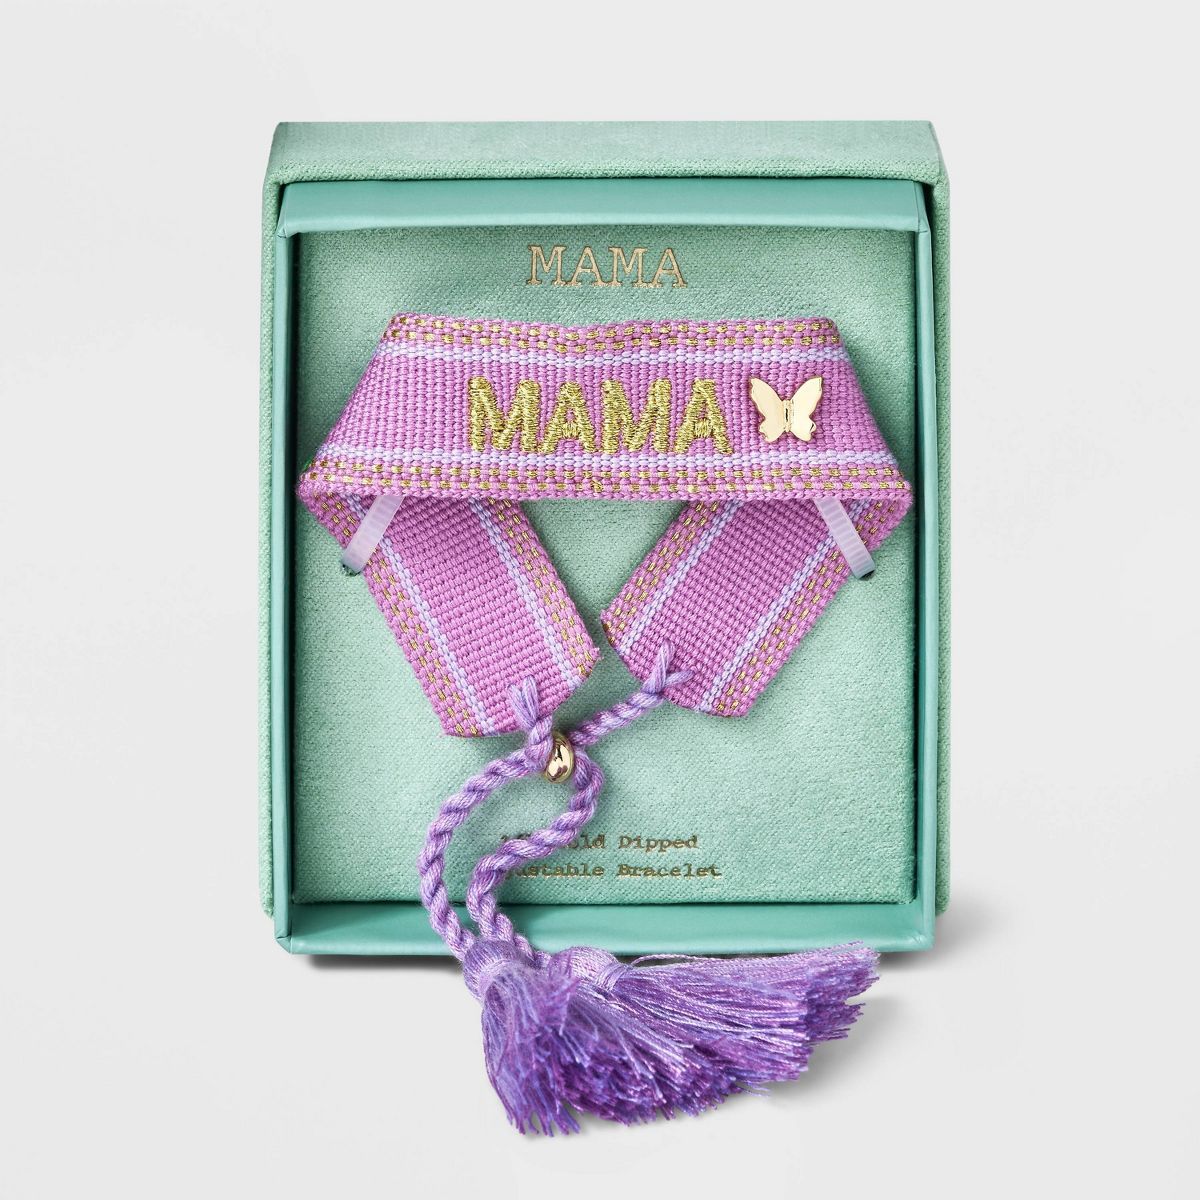 14k Gold Dipped Butterfly "Mama" Woven Adjustable Bracelet - A New Day™ Purple | Target